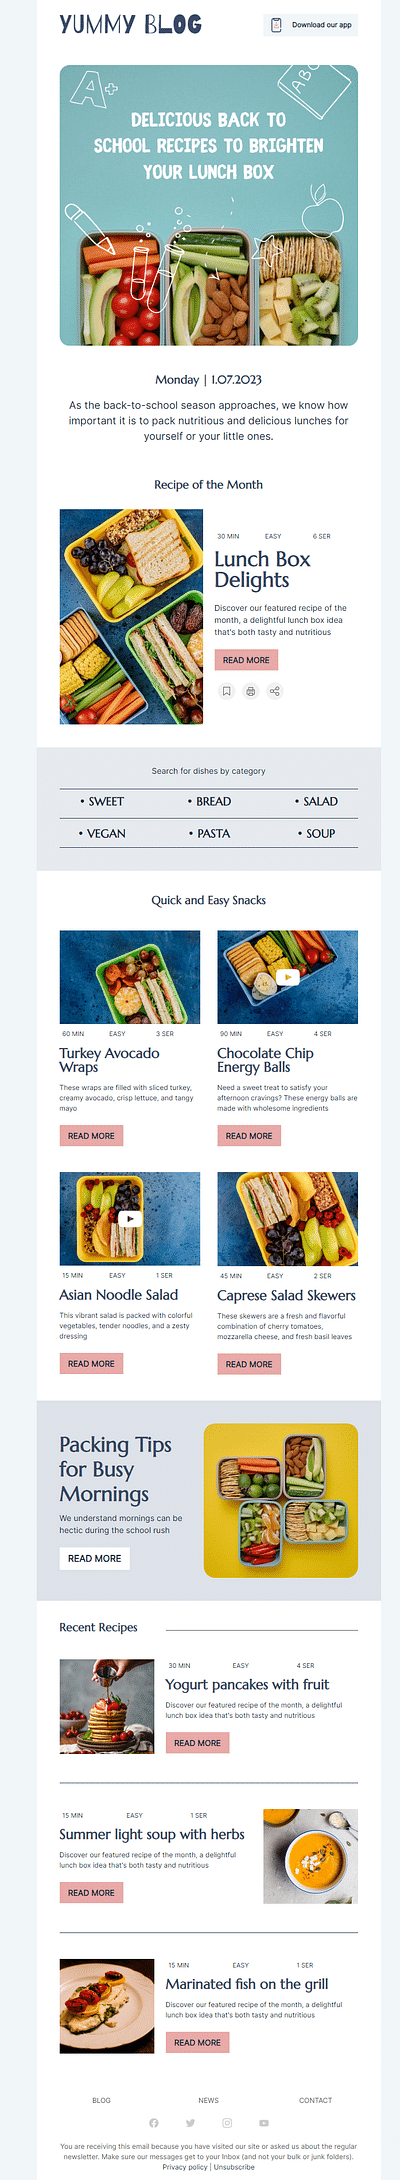 Yummy Blog email Template design - E-Mail-Marketing